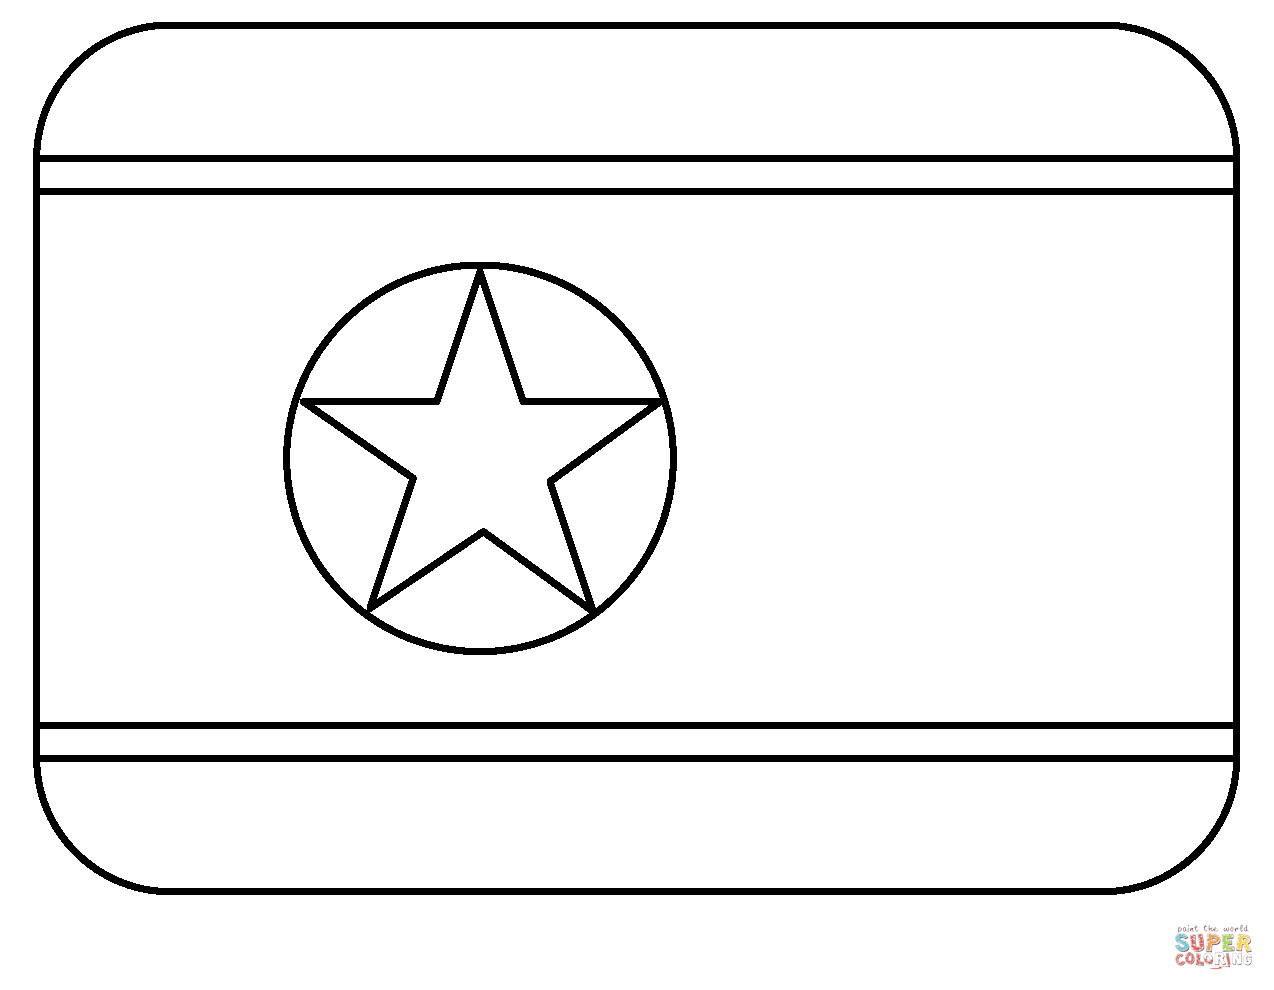 Flag of north korea emoji coloring page free printable coloring pages